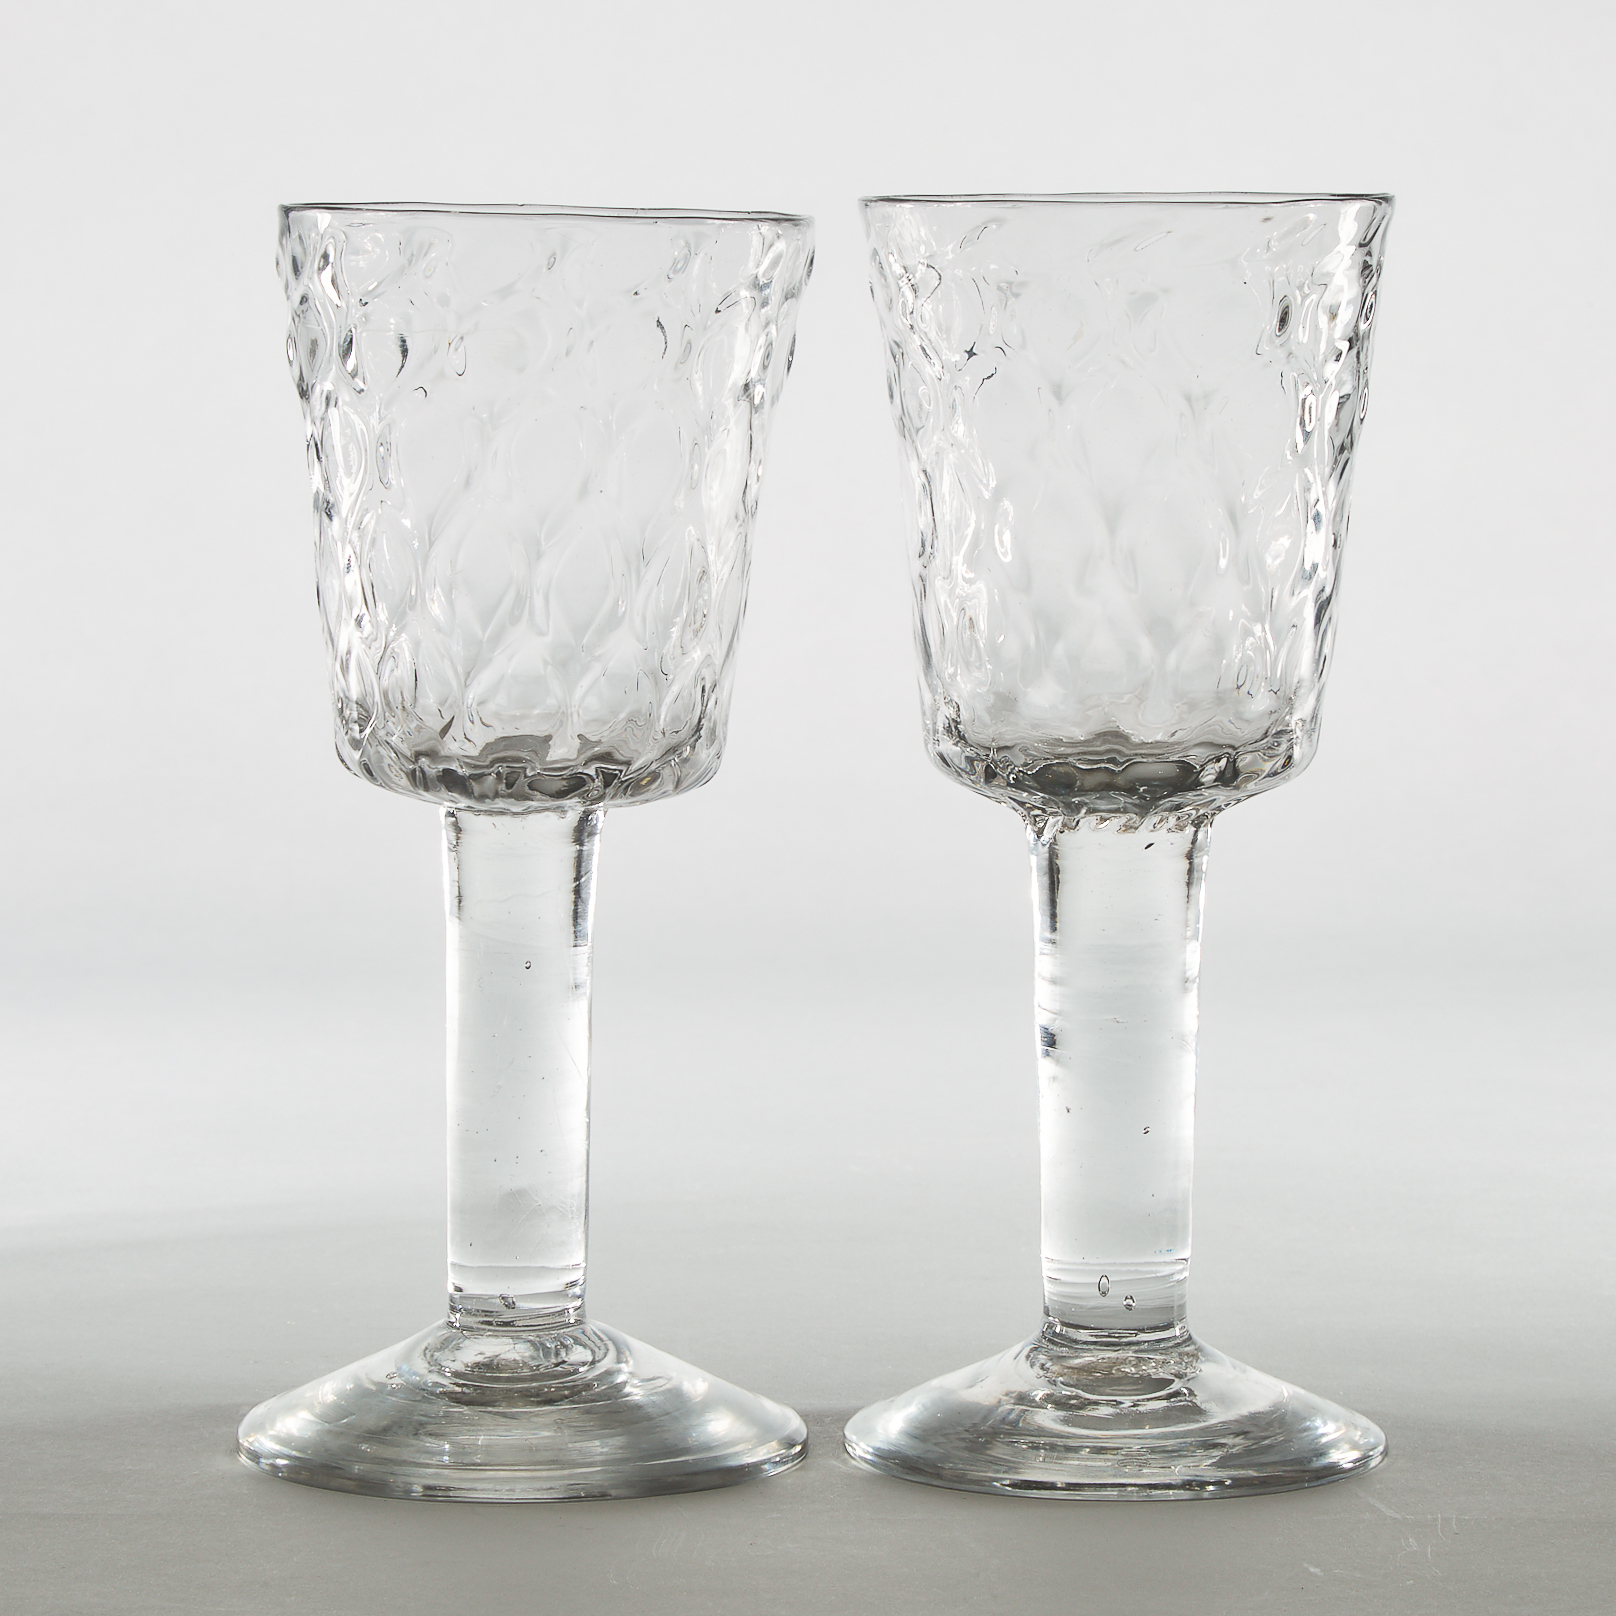 Pair of English Honeycomb Moulded Glass Goblets, c.1760